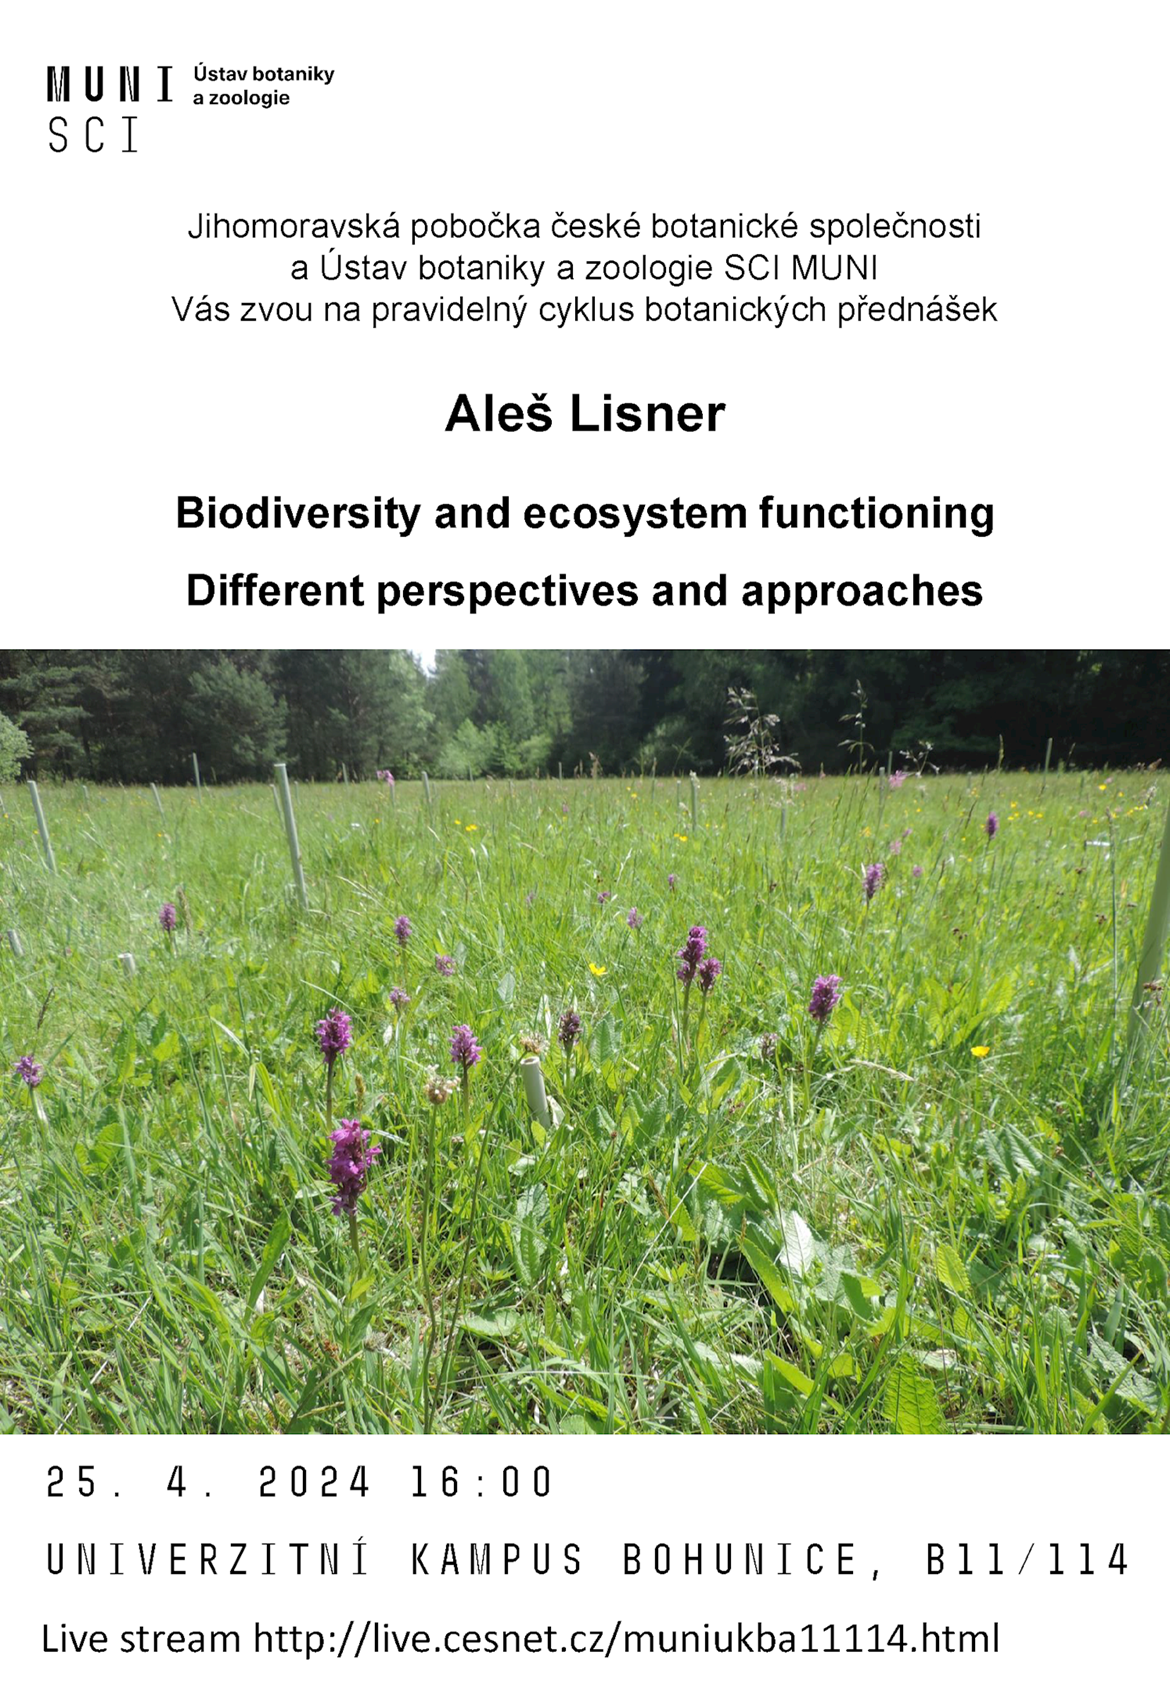 2024 04 25Ales Lisner Biodiversity And Ecosystem Functioning (1)